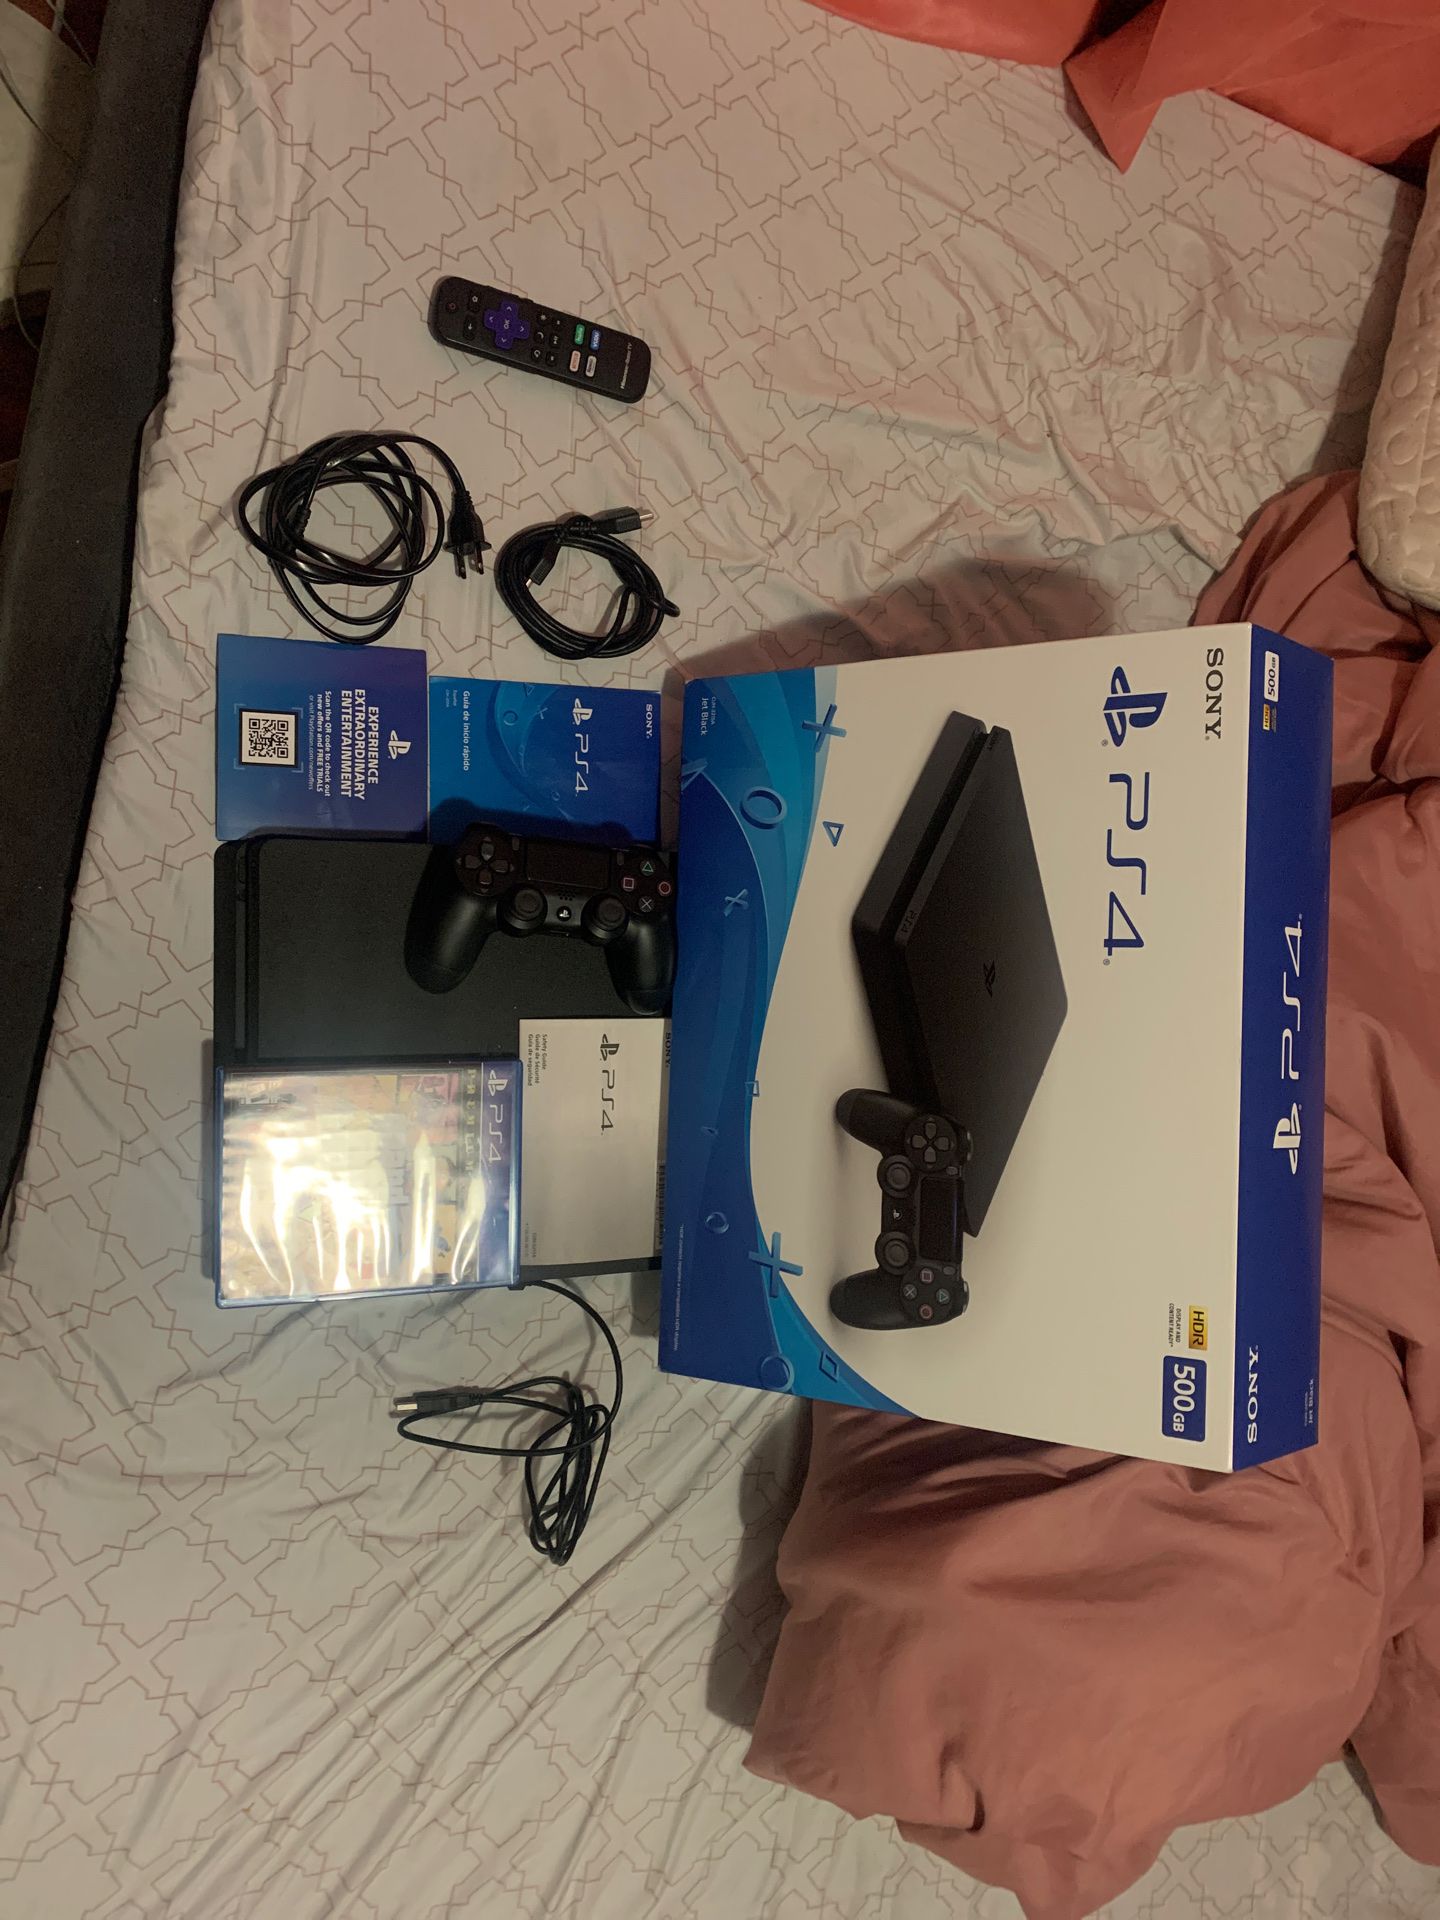 Ps4 slim 500gb with all cables an perfect new remote original 👌🏻 275$$ best like new with box an papers